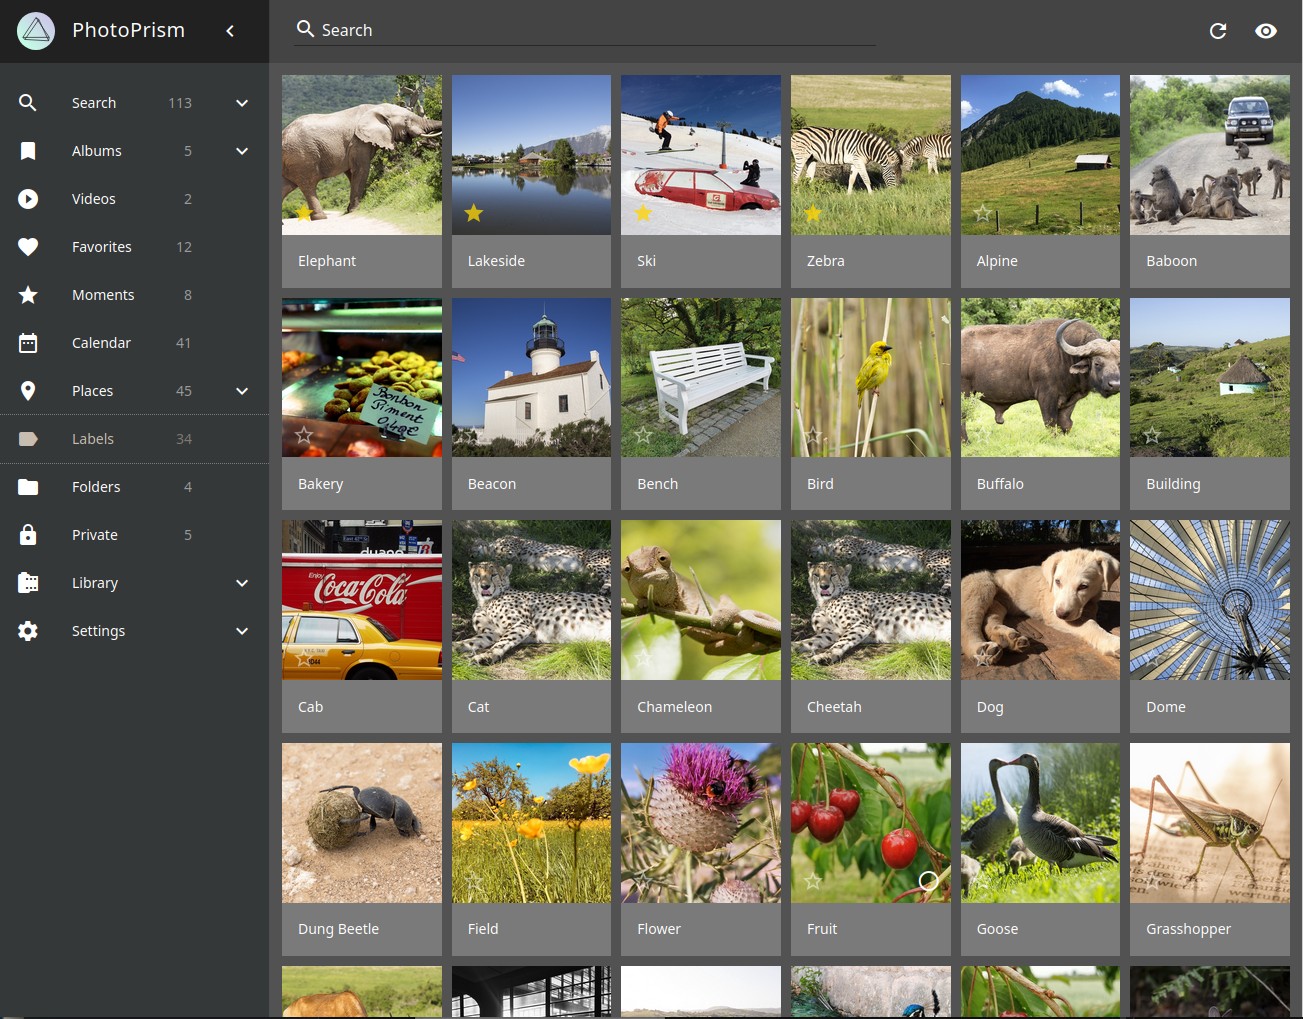 A screenshot showing the Photoprism interface, which is currently showing a grid of images with automatically applied labels below